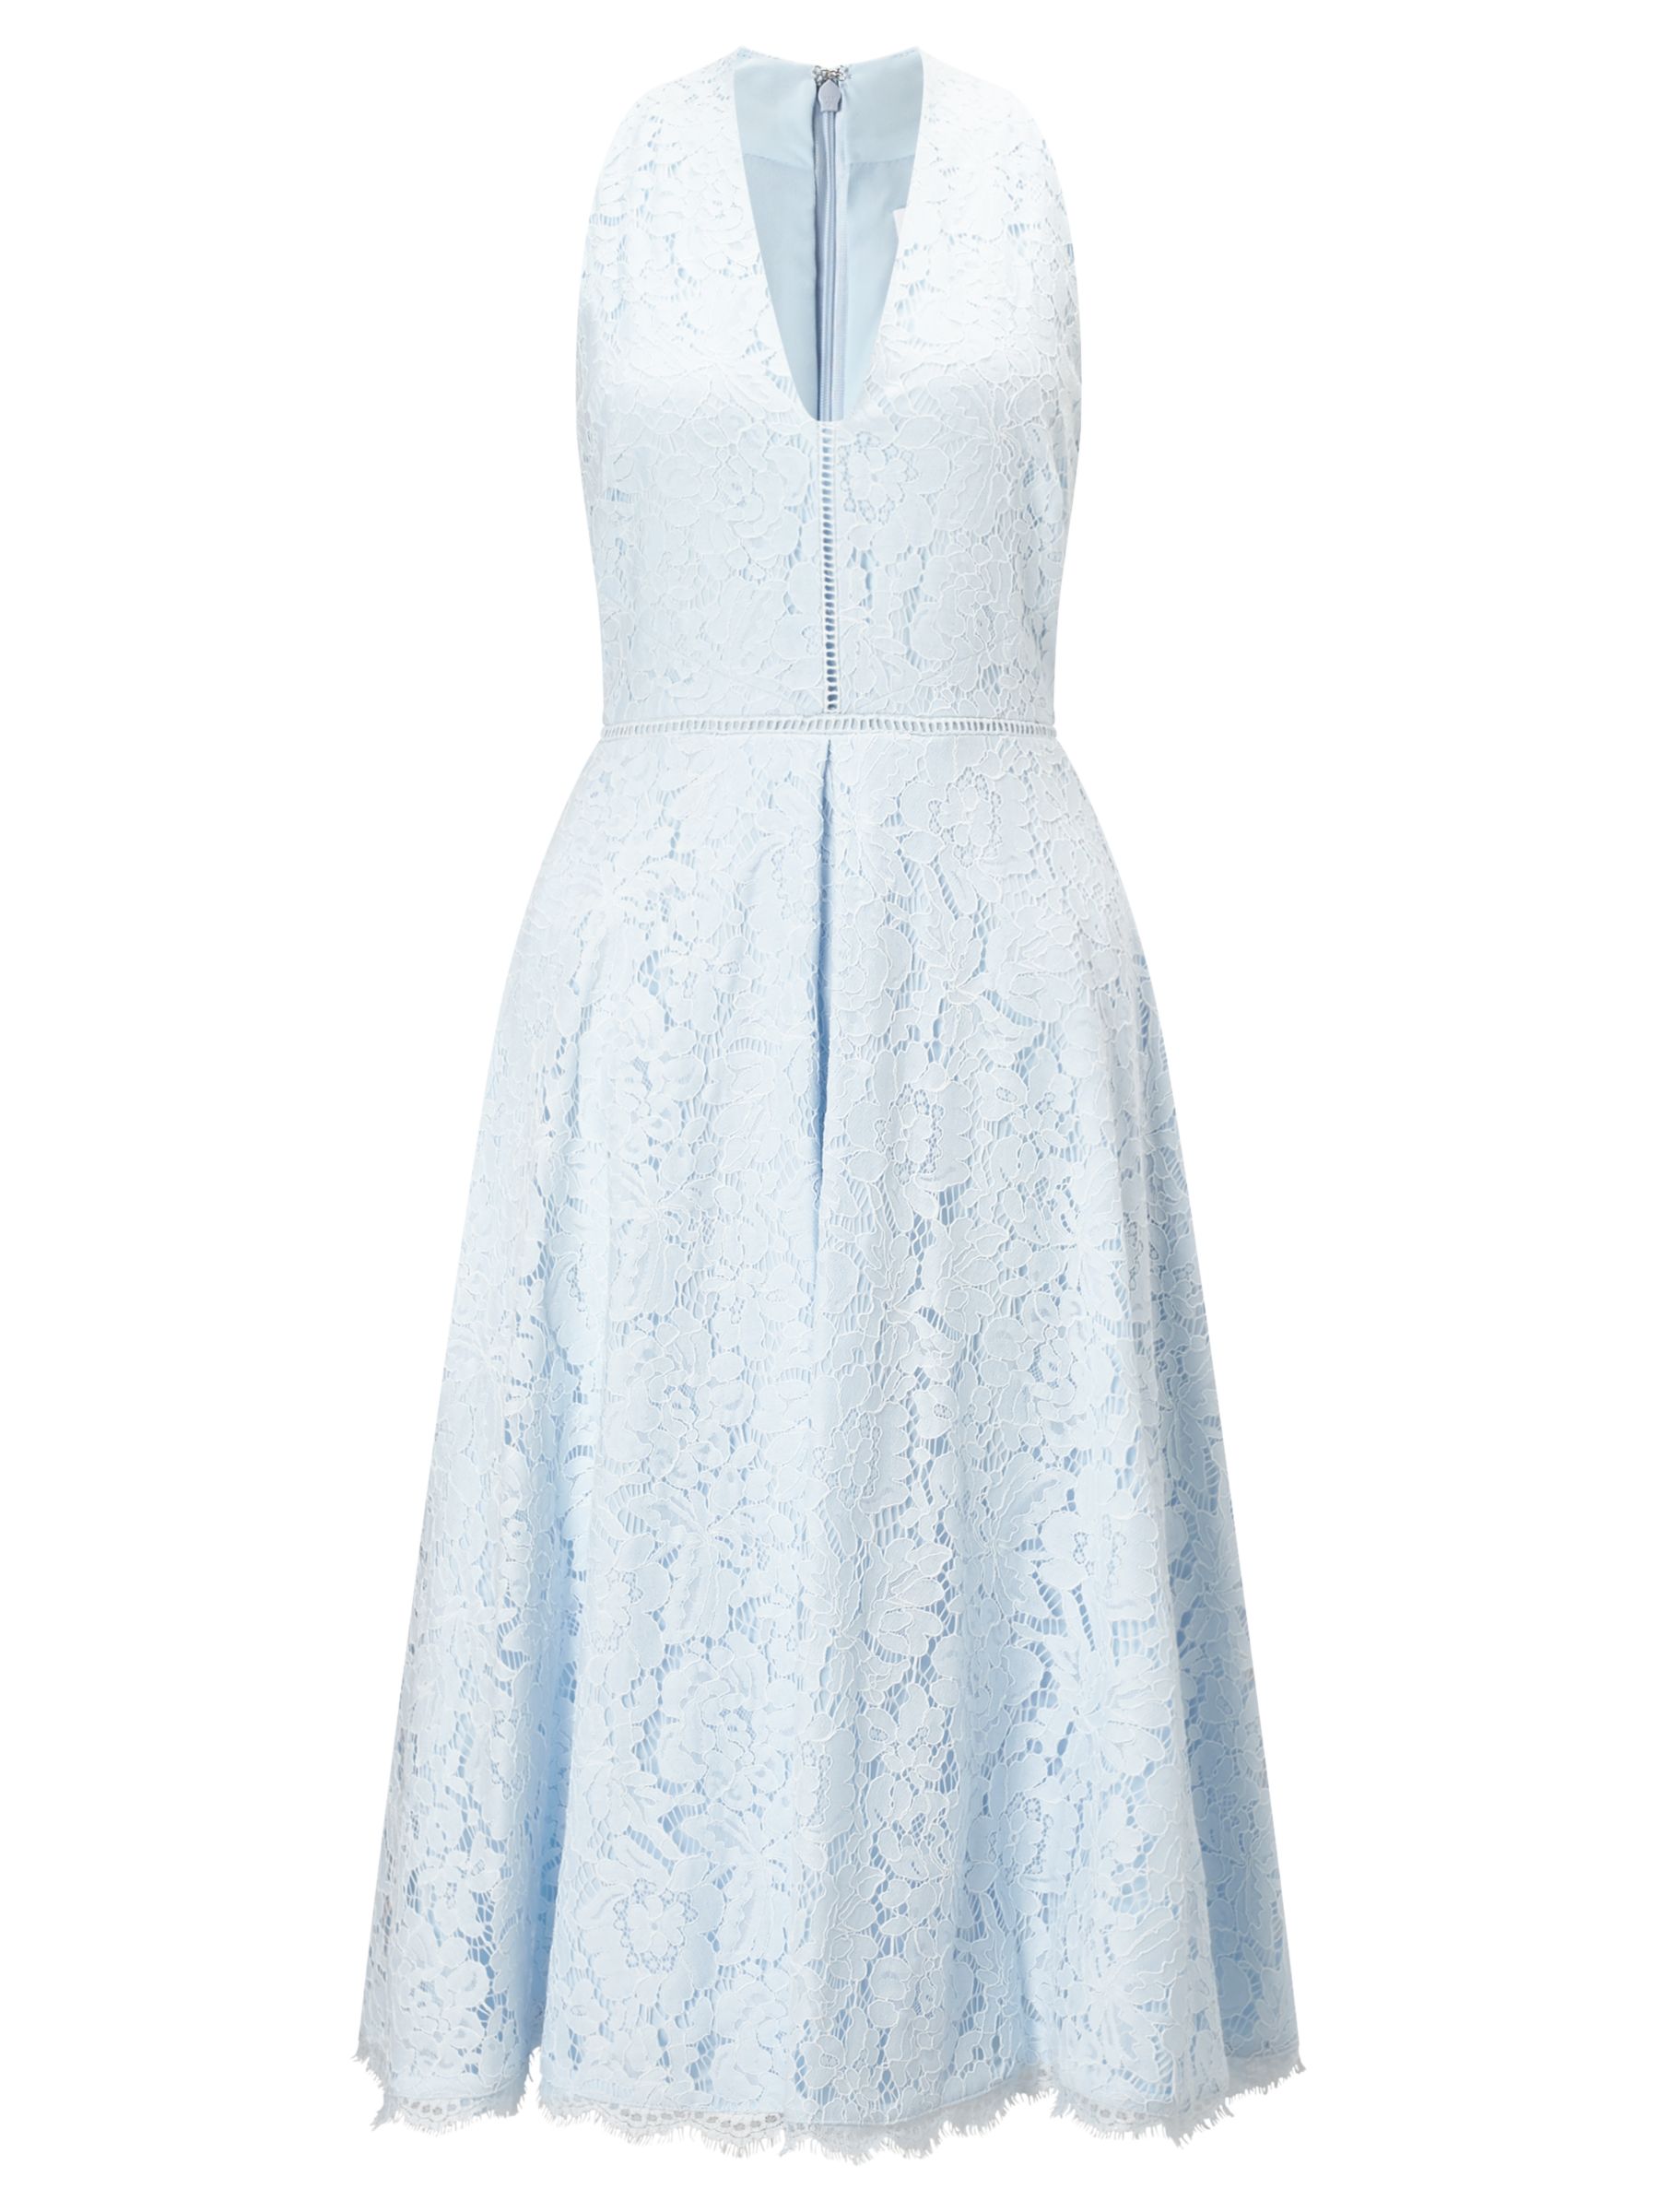 John Lewis Fit And Flare Lace Dress at John Lewis & Partners